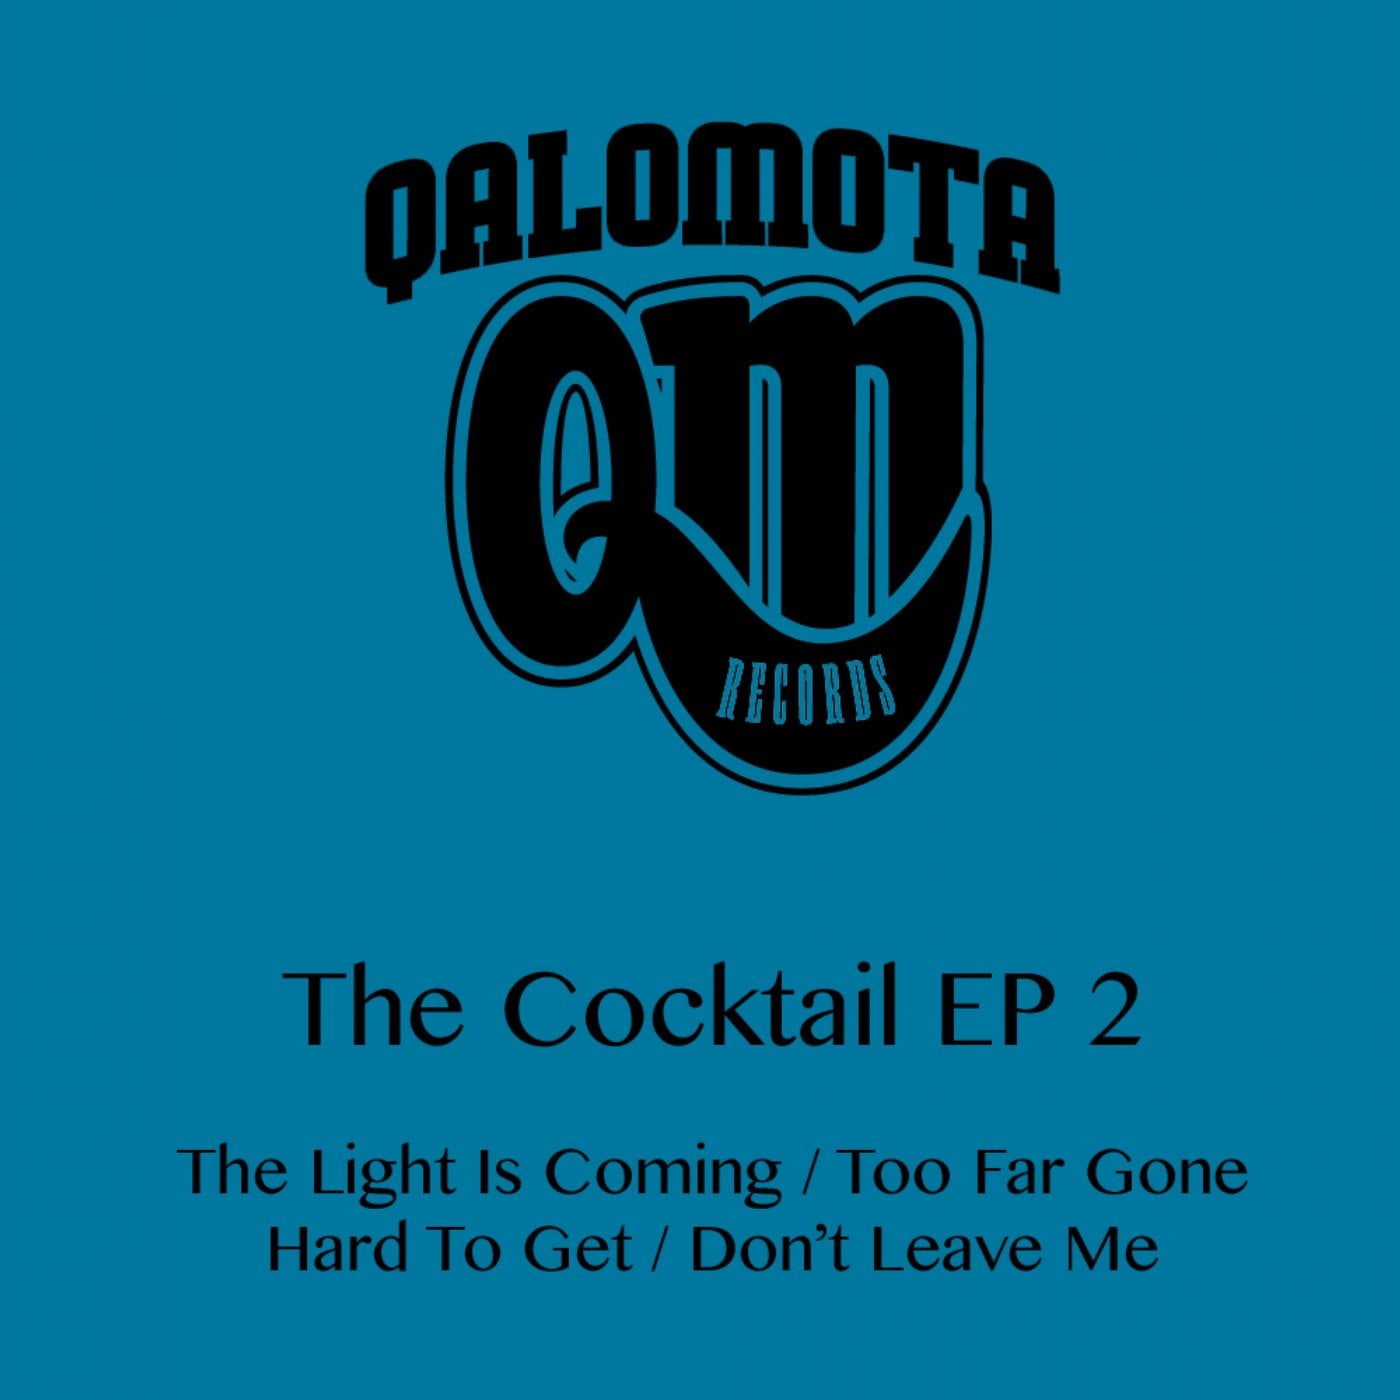 The Cocktail EP 2